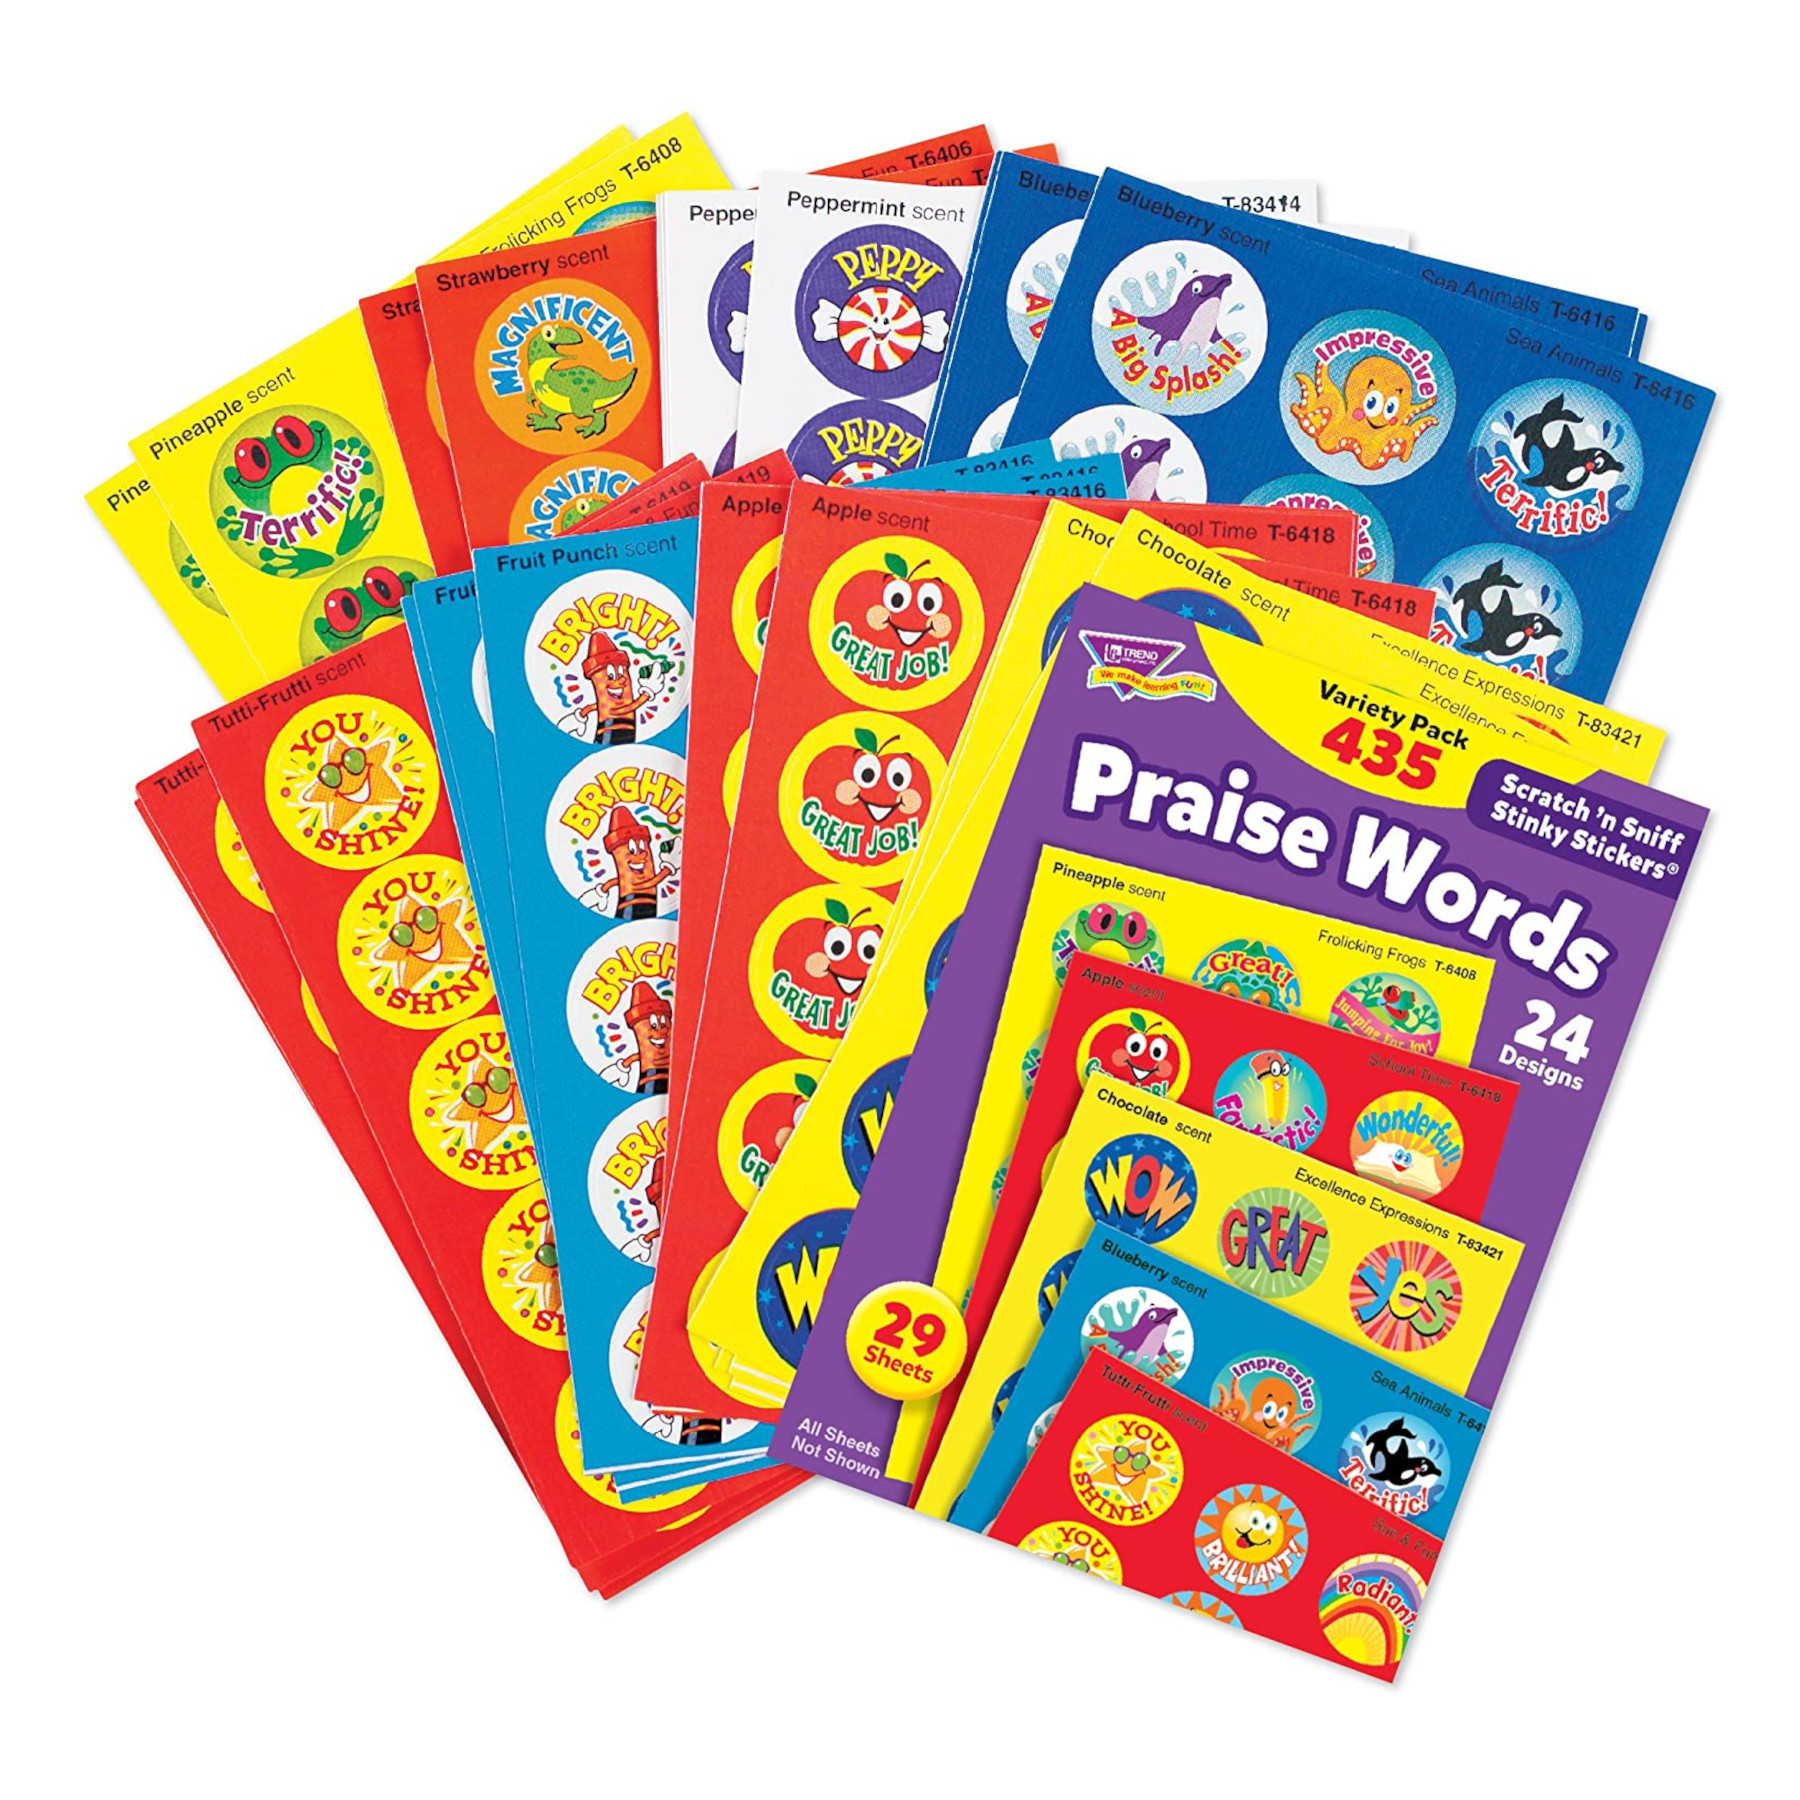 Trend Enterprises Stinky Sticker Praise Words Jumbo Pack Stinky Sticker, 1 in, Pack of 435 - image 3 of 3